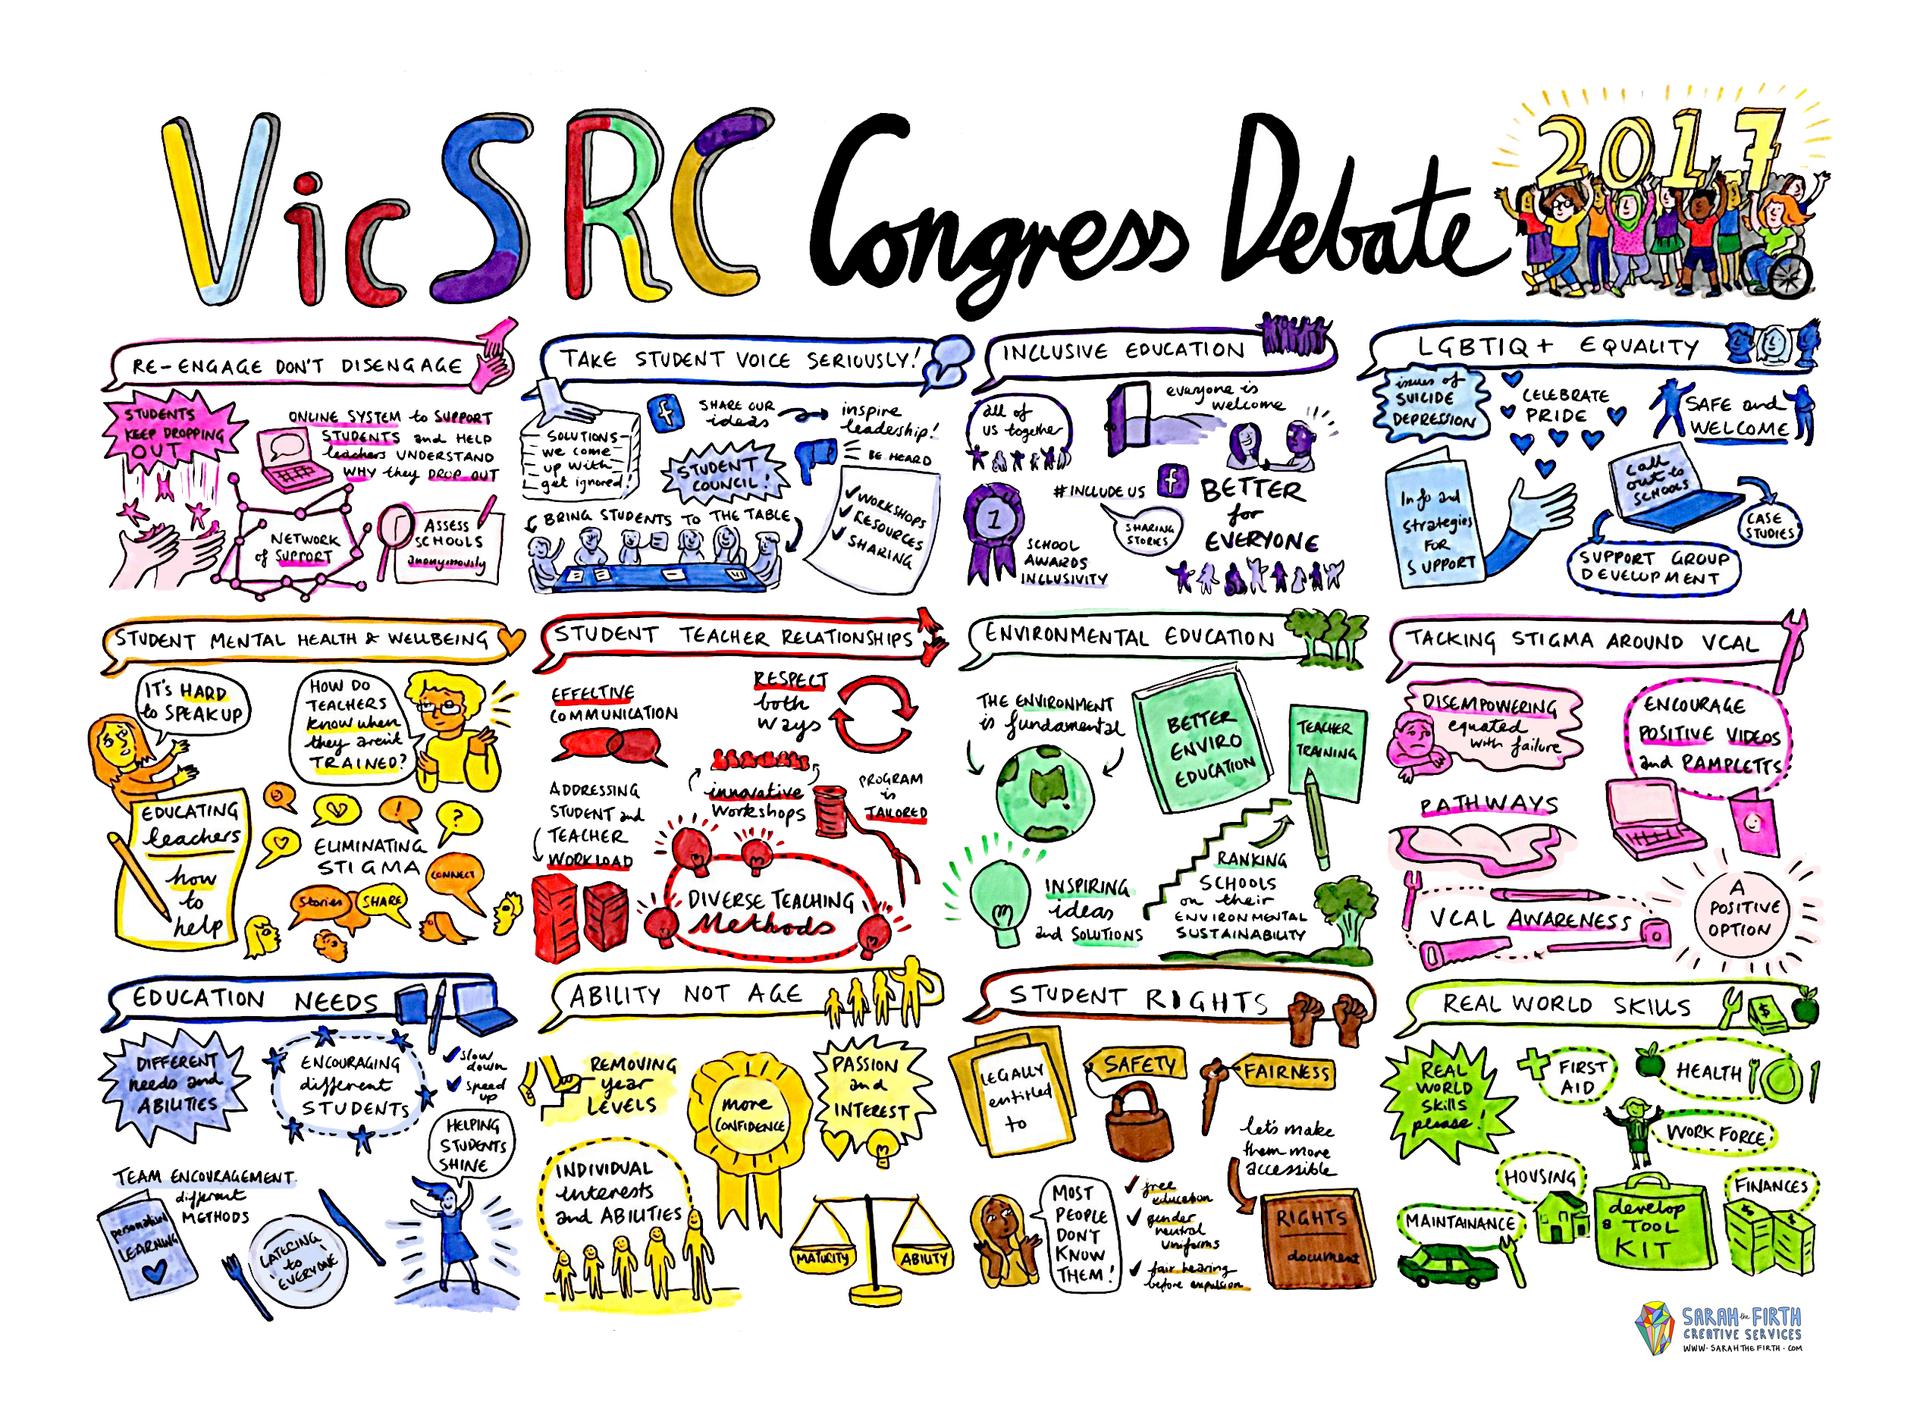 Graphic facilitation of the issues and ideas discussed at Congress 2017.